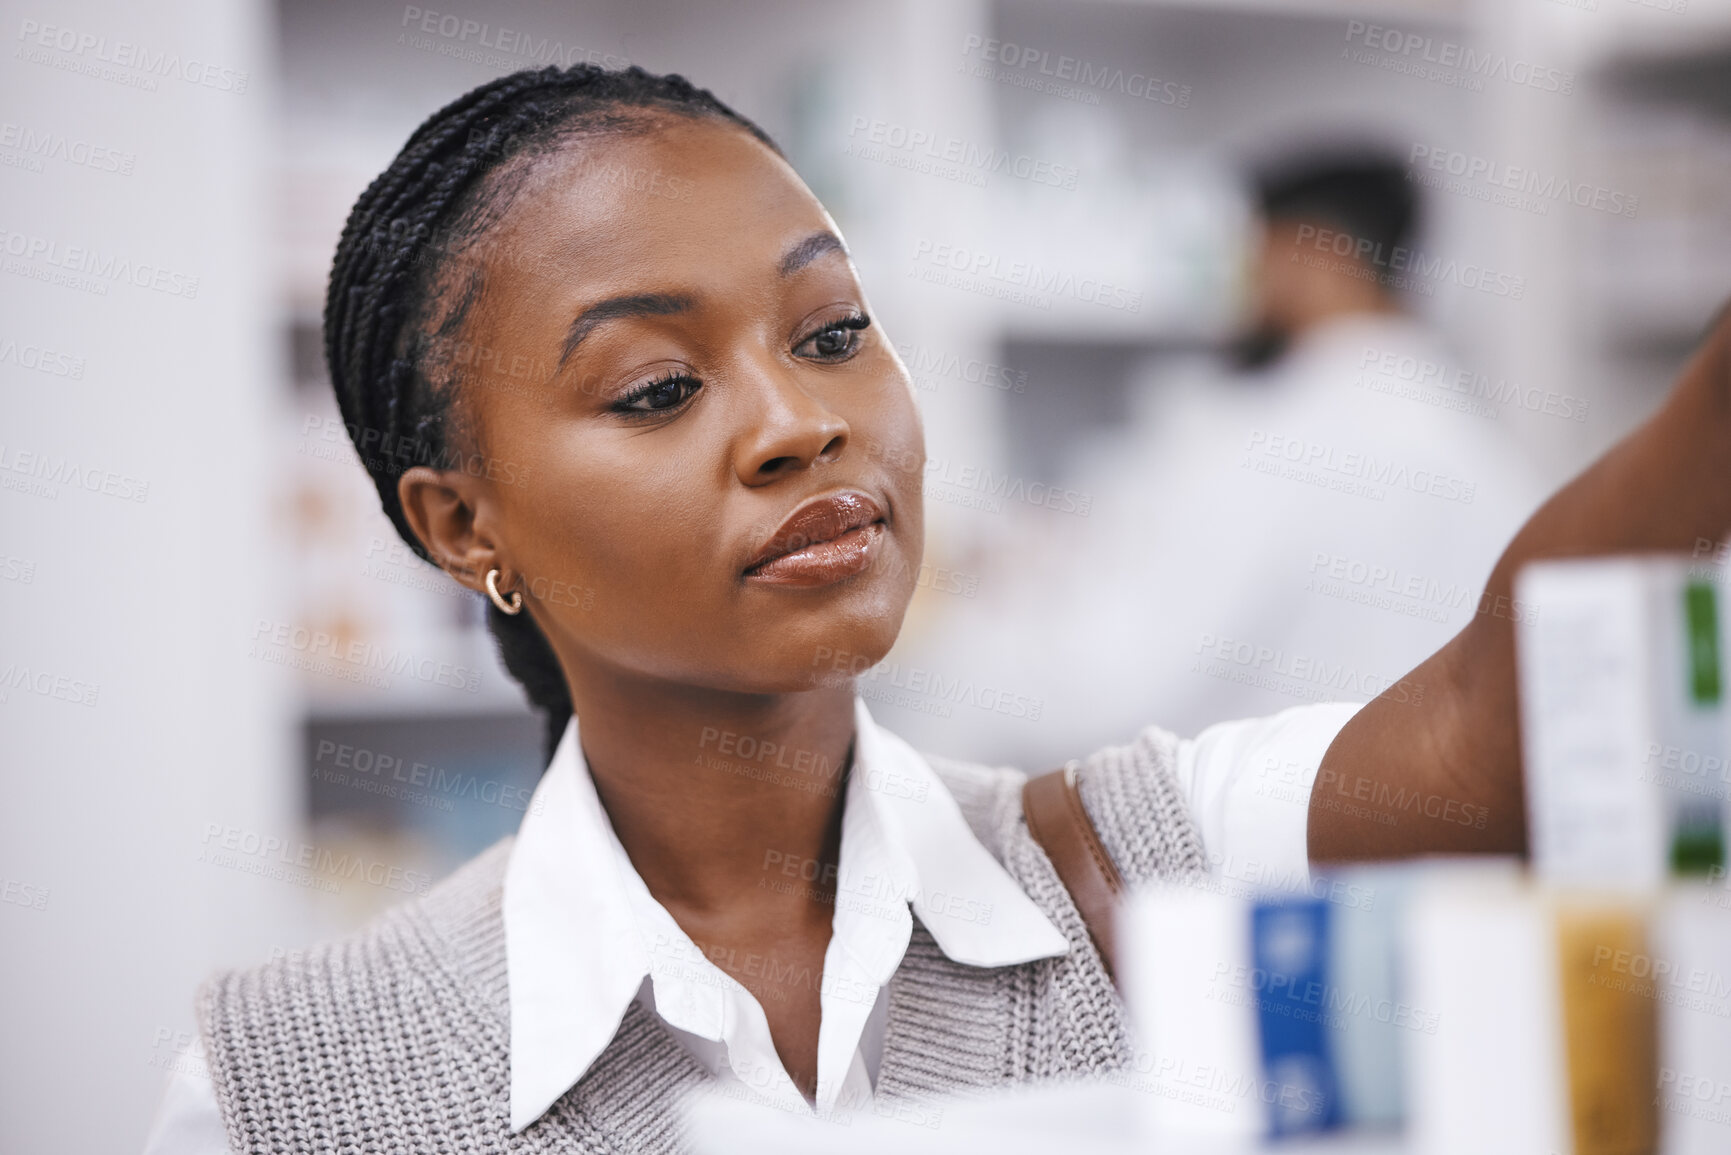 Buy stock photo Pharmacy stock, woman and medication check of a customer in a healthcare and wellness store. Medical, retail and pharmaceutical label information checking of an African female person by a shop shelf